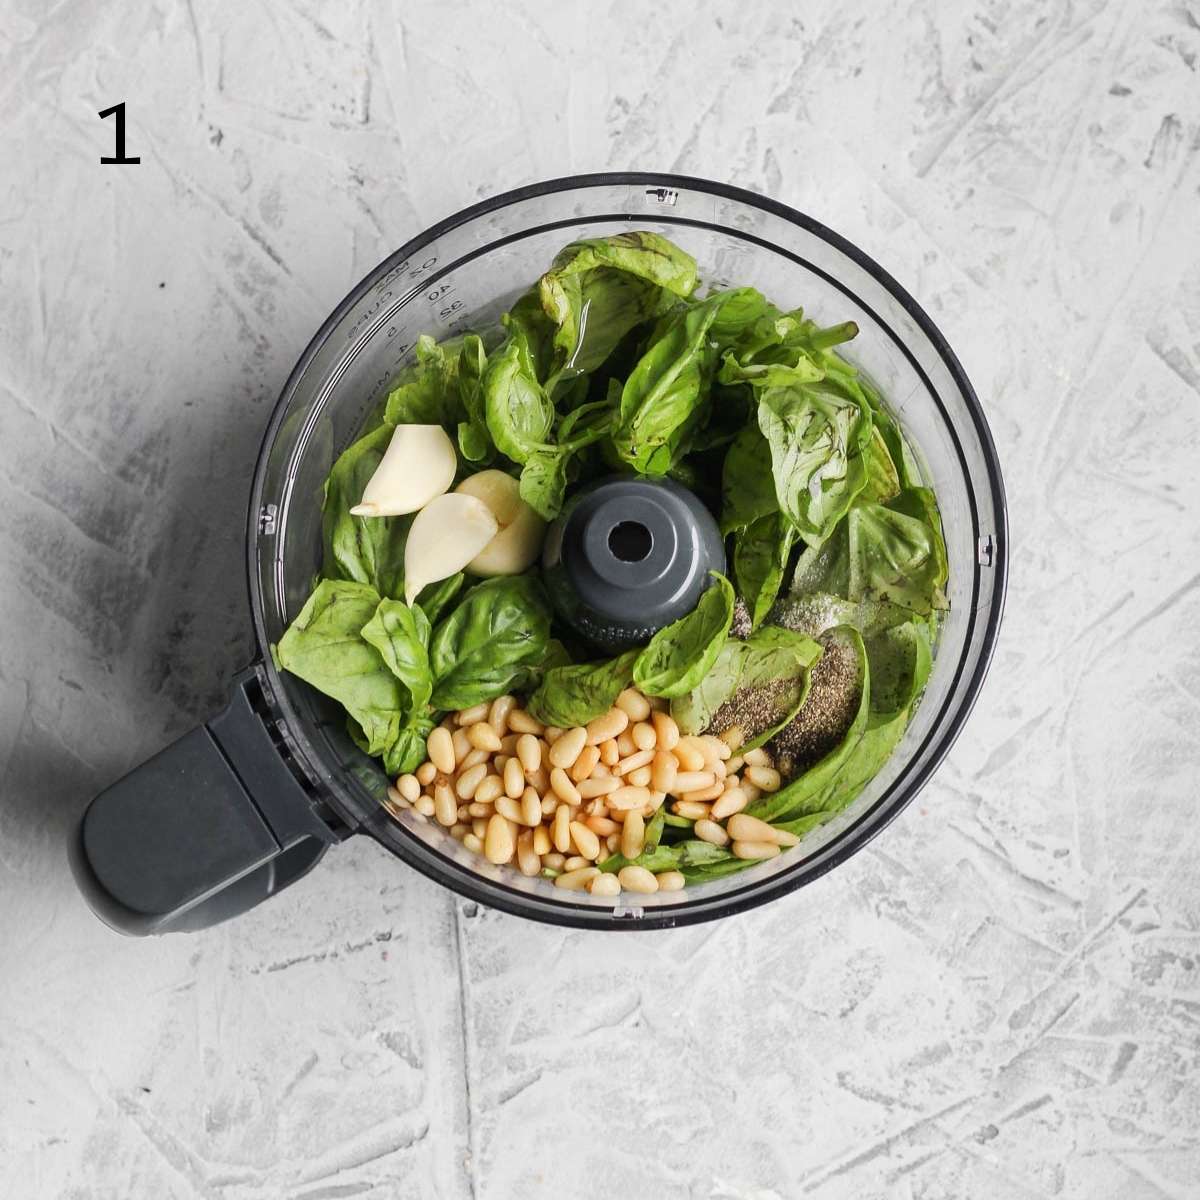 a food processor filled with basil, garlic cloves, pine nuts, avocado oil, salt, and pepper